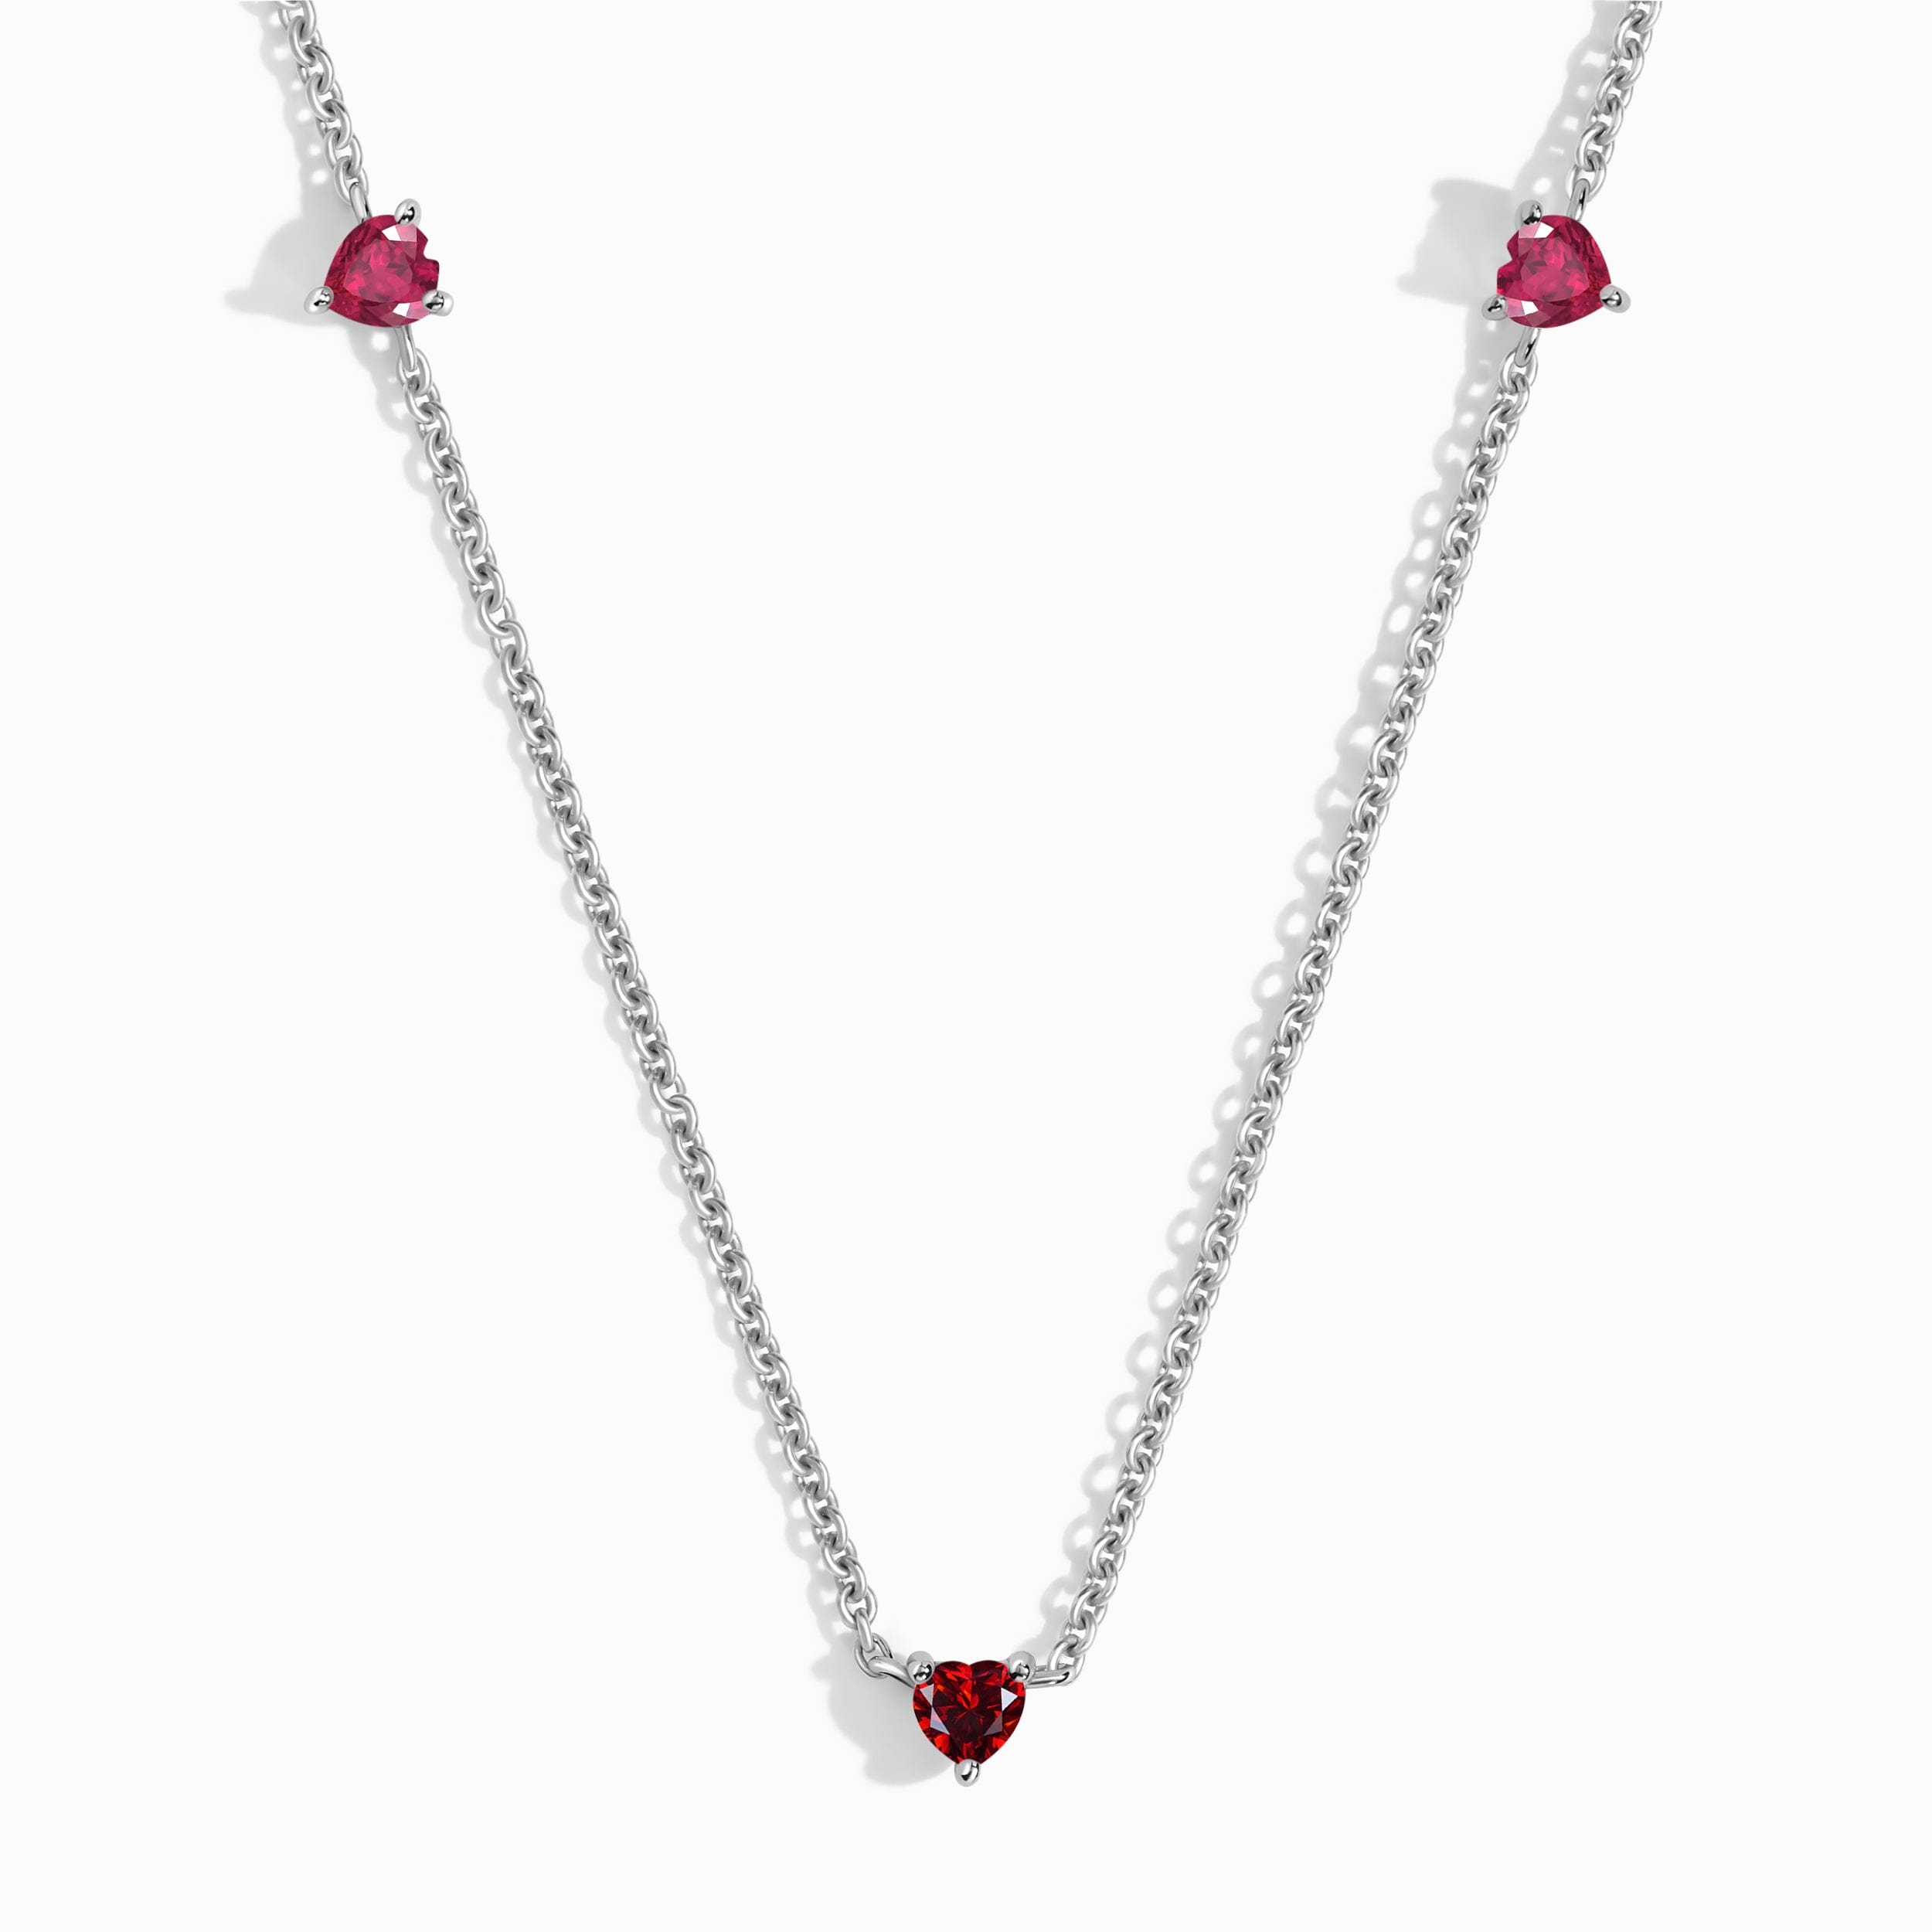 Sterling Silver Engravable Lock Necklace with Gemstone and Ruby Stone